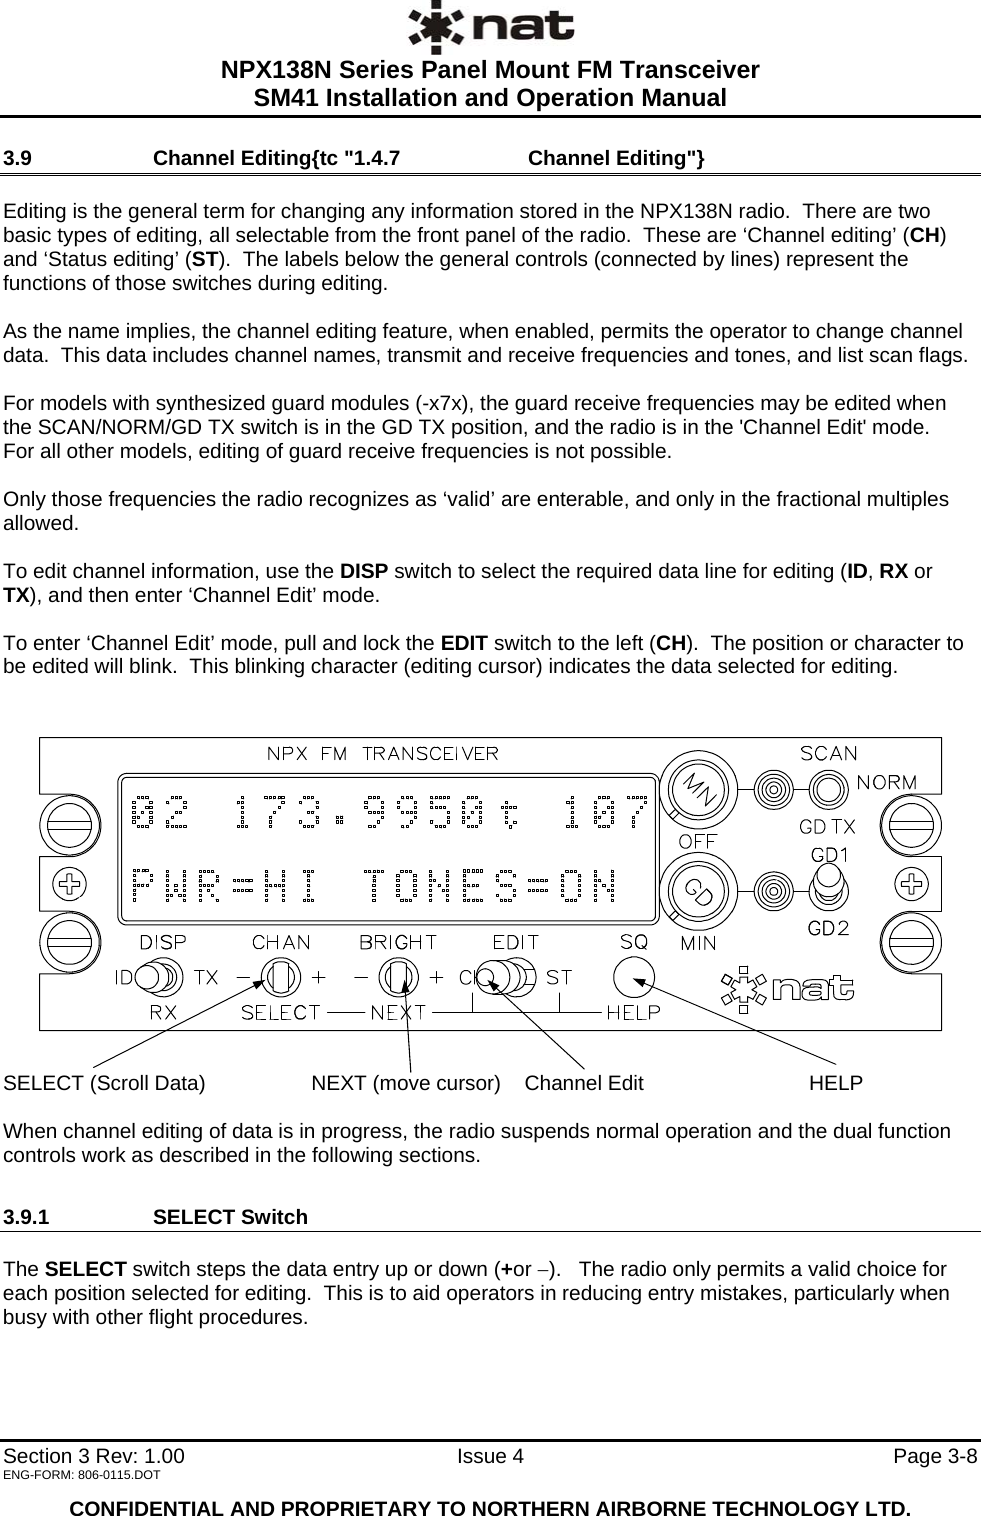  NPX138N Series Panel Mount FM Transceiver  SM41 Installation and Operation Manual   Section 3 Rev: 1.00   Issue 4  Page 3-8 3.9  Channel Editing{tc &quot;1.4.7   Channel Editing&quot;}  Editing is the general term for changing any information stored in the NPX138N radio.  There are two basic types of editing, all selectable from the front panel of the radio.  These are ‘Channel editing’ (CH) and ‘Status editing’ (ST).  The labels below the general controls (connected by lines) represent the functions of those switches during editing.  As the name implies, the channel editing feature, when enabled, permits the operator to change channel data.  This data includes channel names, transmit and receive frequencies and tones, and list scan flags.  For models with synthesized guard modules (-x7x), the guard receive frequencies may be edited when the SCAN/NORM/GD TX switch is in the GD TX position, and the radio is in the &apos;Channel Edit&apos; mode.   For all other models, editing of guard receive frequencies is not possible.  Only those frequencies the radio recognizes as ‘valid’ are enterable, and only in the fractional multiples allowed.  To edit channel information, use the DISP switch to select the required data line for editing (ID, RX or TX), and then enter ‘Channel Edit’ mode.  To enter ‘Channel Edit’ mode, pull and lock the EDIT switch to the left (CH).  The position or character to be edited will blink.  This blinking character (editing cursor) indicates the data selected for editing.   SELECT (Scroll Data)  NEXT (move cursor)  Channel Edit  HELP      When channel editing of data is in progress, the radio suspends normal operation and the dual function controls work as described in the following sections. 3.9.1 SELECT Switch  The SELECT switch steps the data entry up or down (+or −).   The radio only permits a valid choice for each position selected for editing.  This is to aid operators in reducing entry mistakes, particularly when busy with other flight procedures.    ENG-FORM: 806-0115.DOT  CONFIDENTIAL AND PROPRIETARY TO NORTHERN AIRBORNE TECHNOLOGY LTD. 